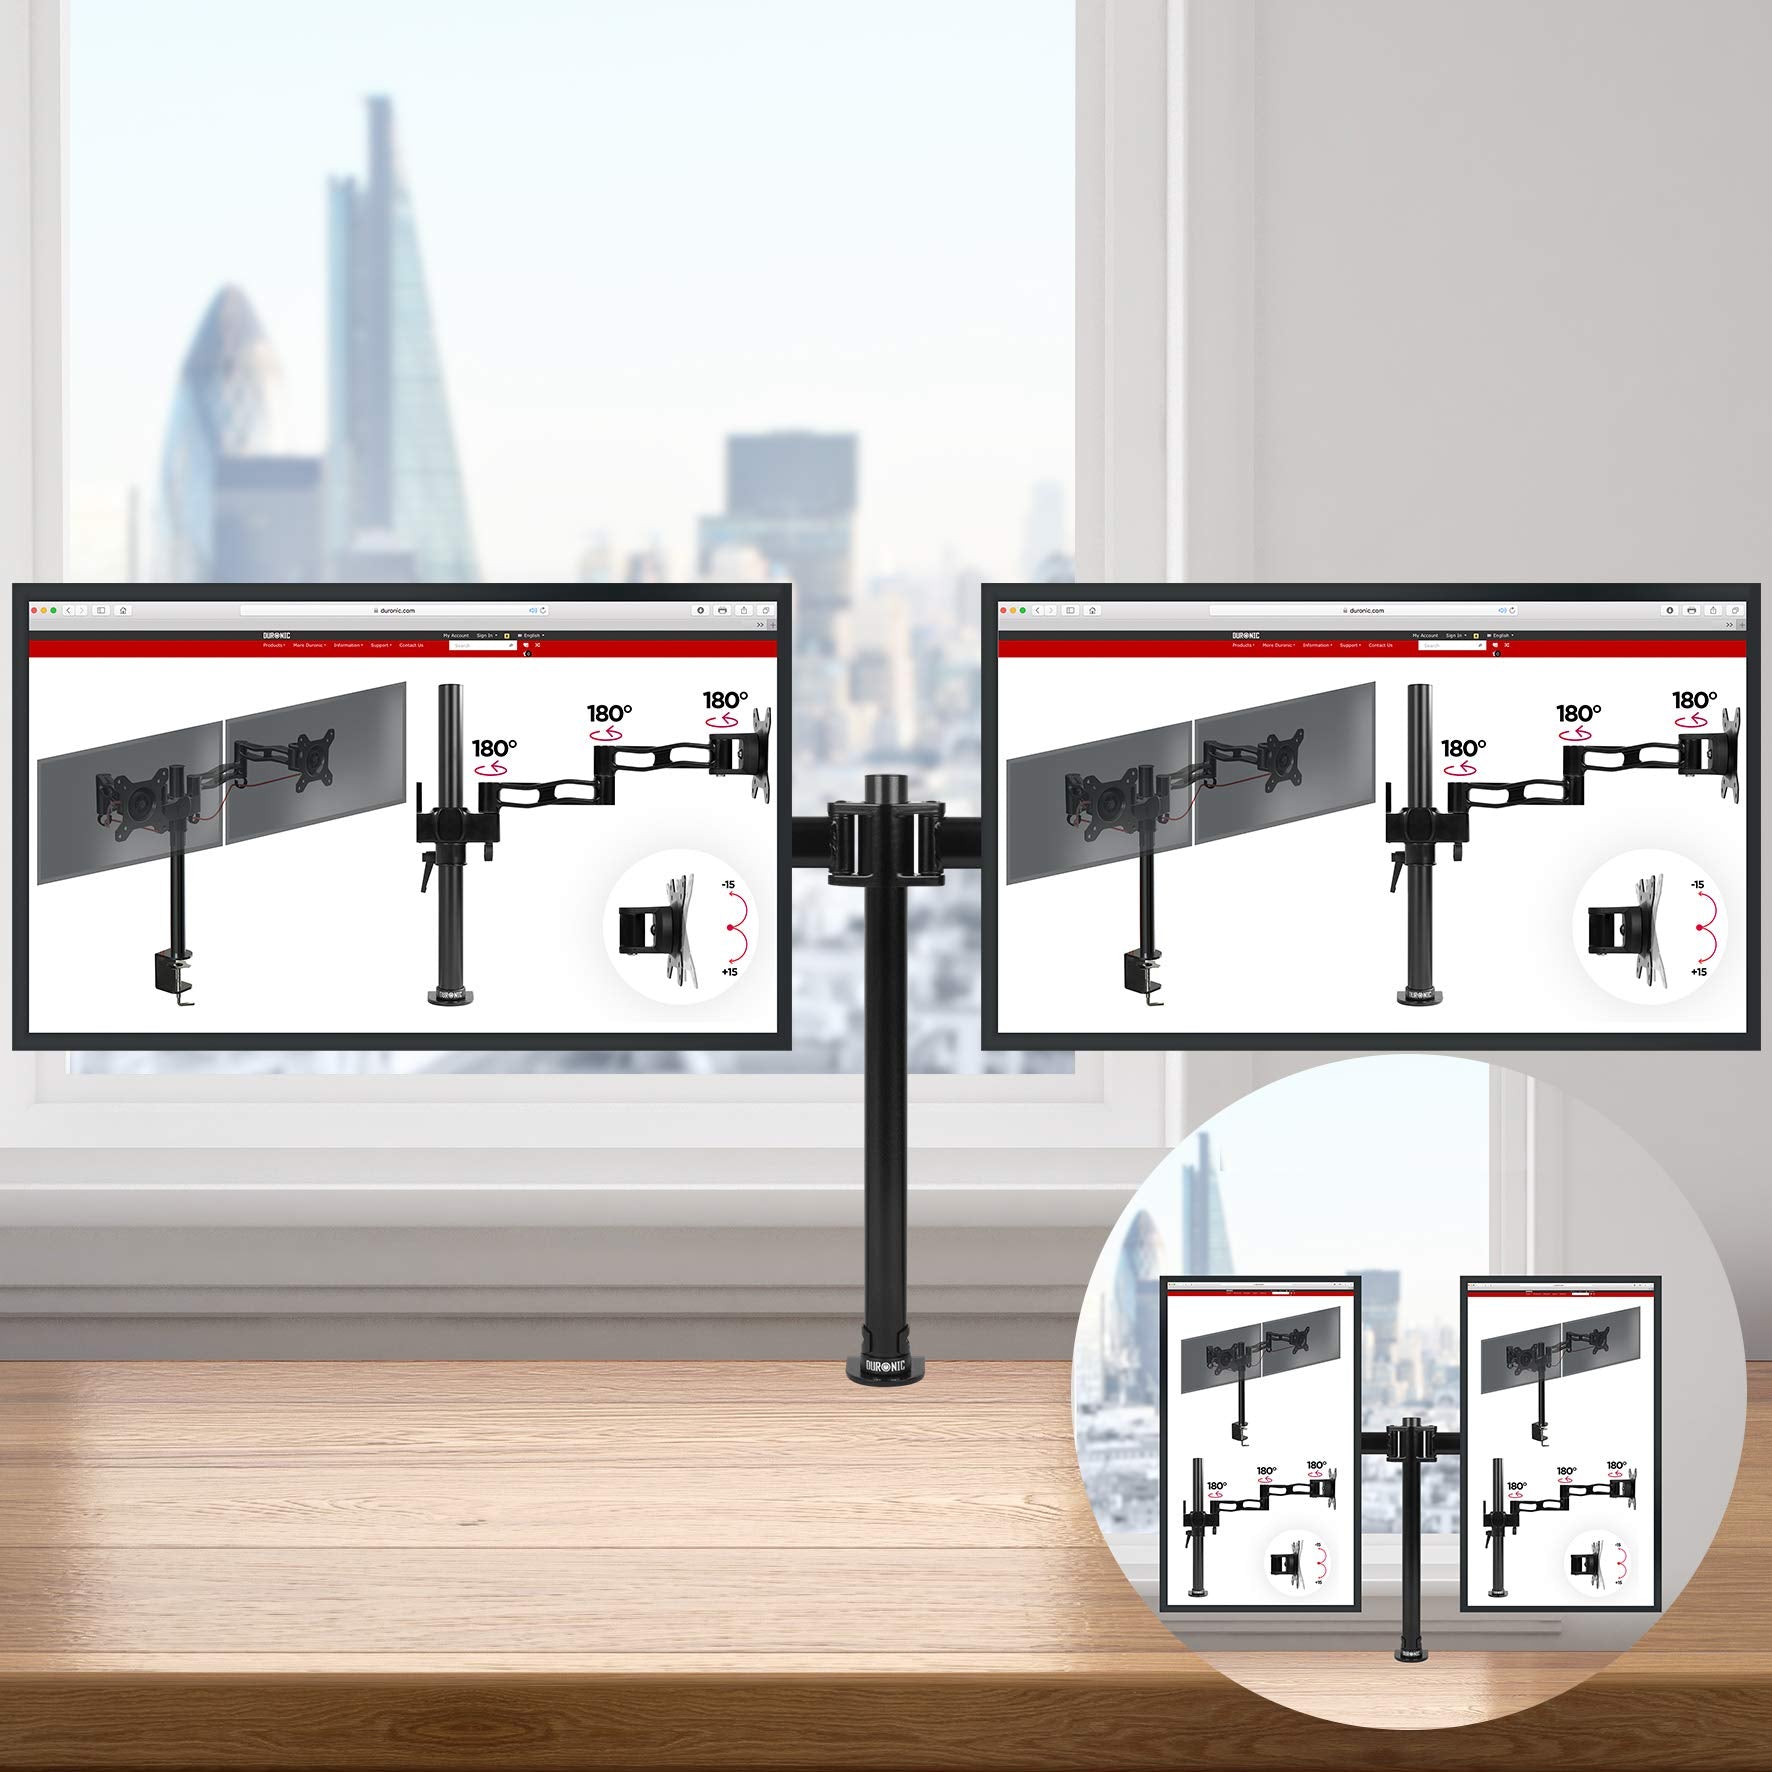 Duronic Dual Monitor Stand Arm DM252 Height Adjustable Twin Desk Monitor Riser Monitor Mount Arms for 13-27” Computer/ PC Screens with VESA 75 100 Monitor Desk Mount for Home & Office Studio